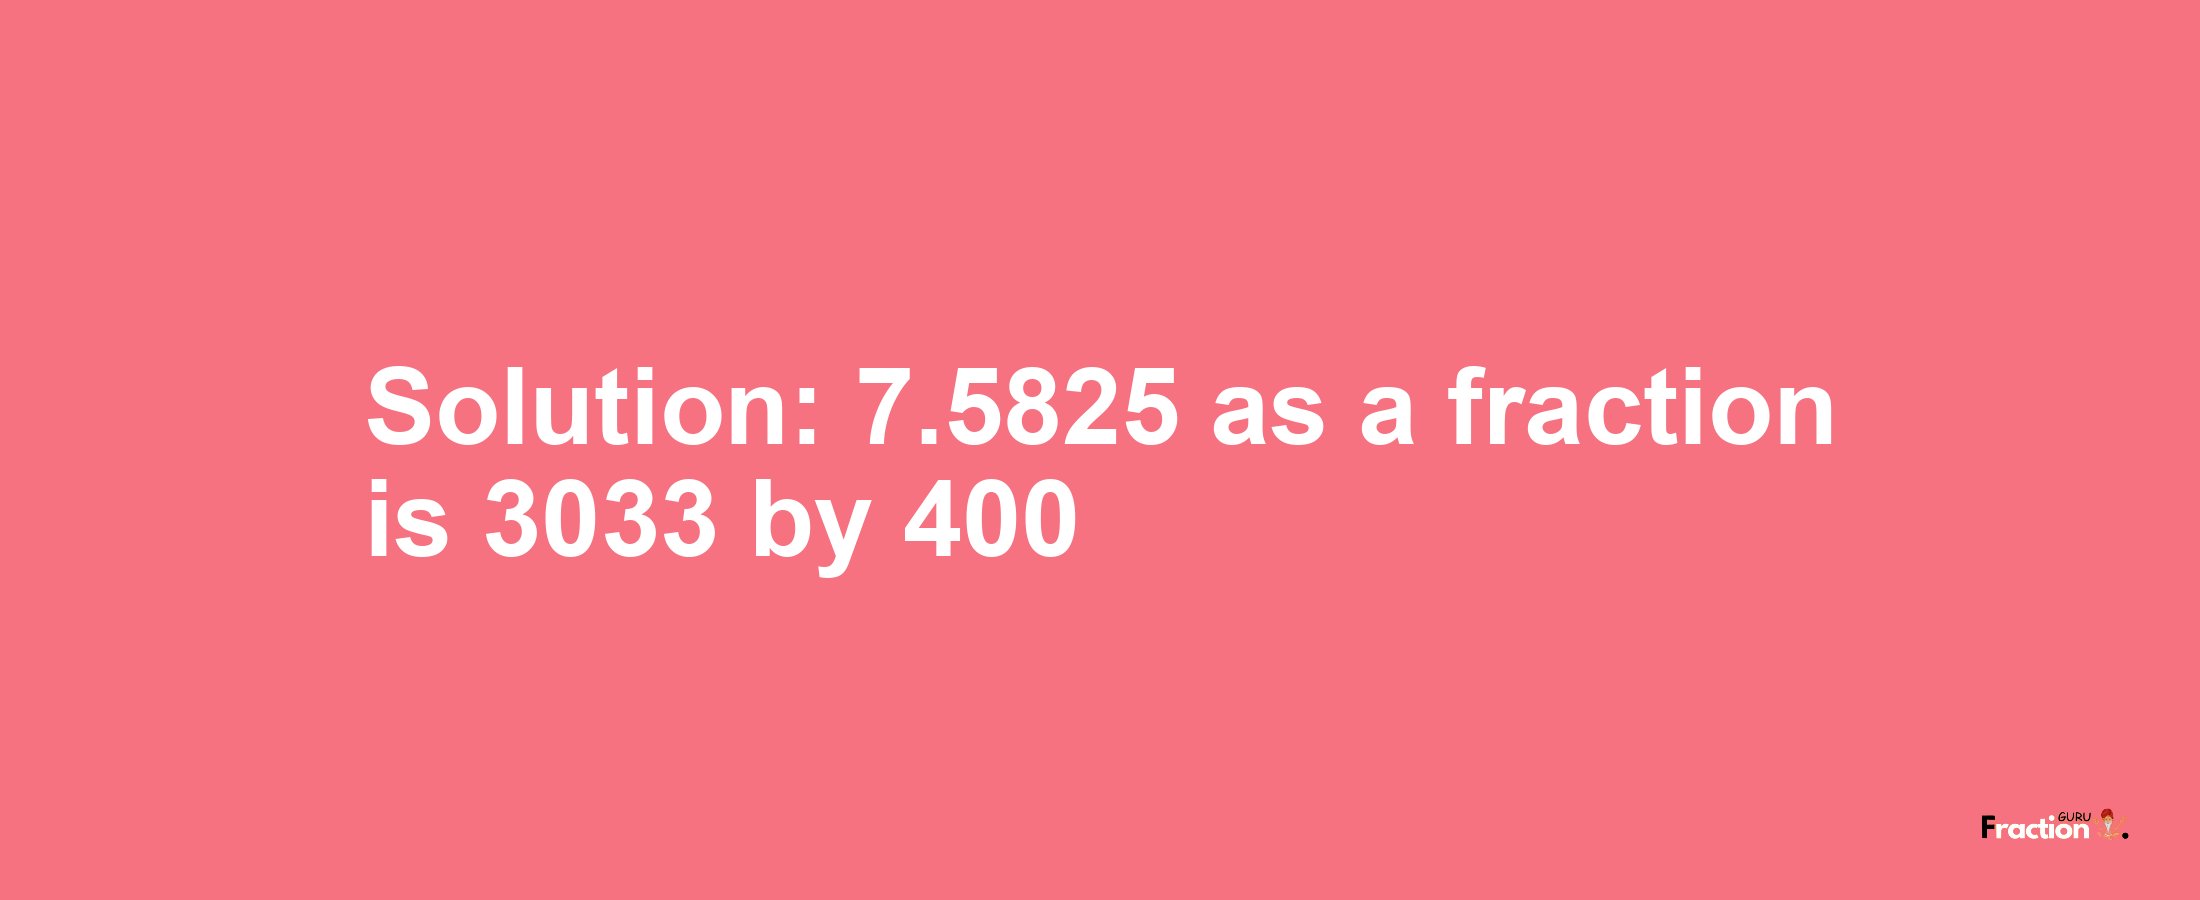 Solution:7.5825 as a fraction is 3033/400